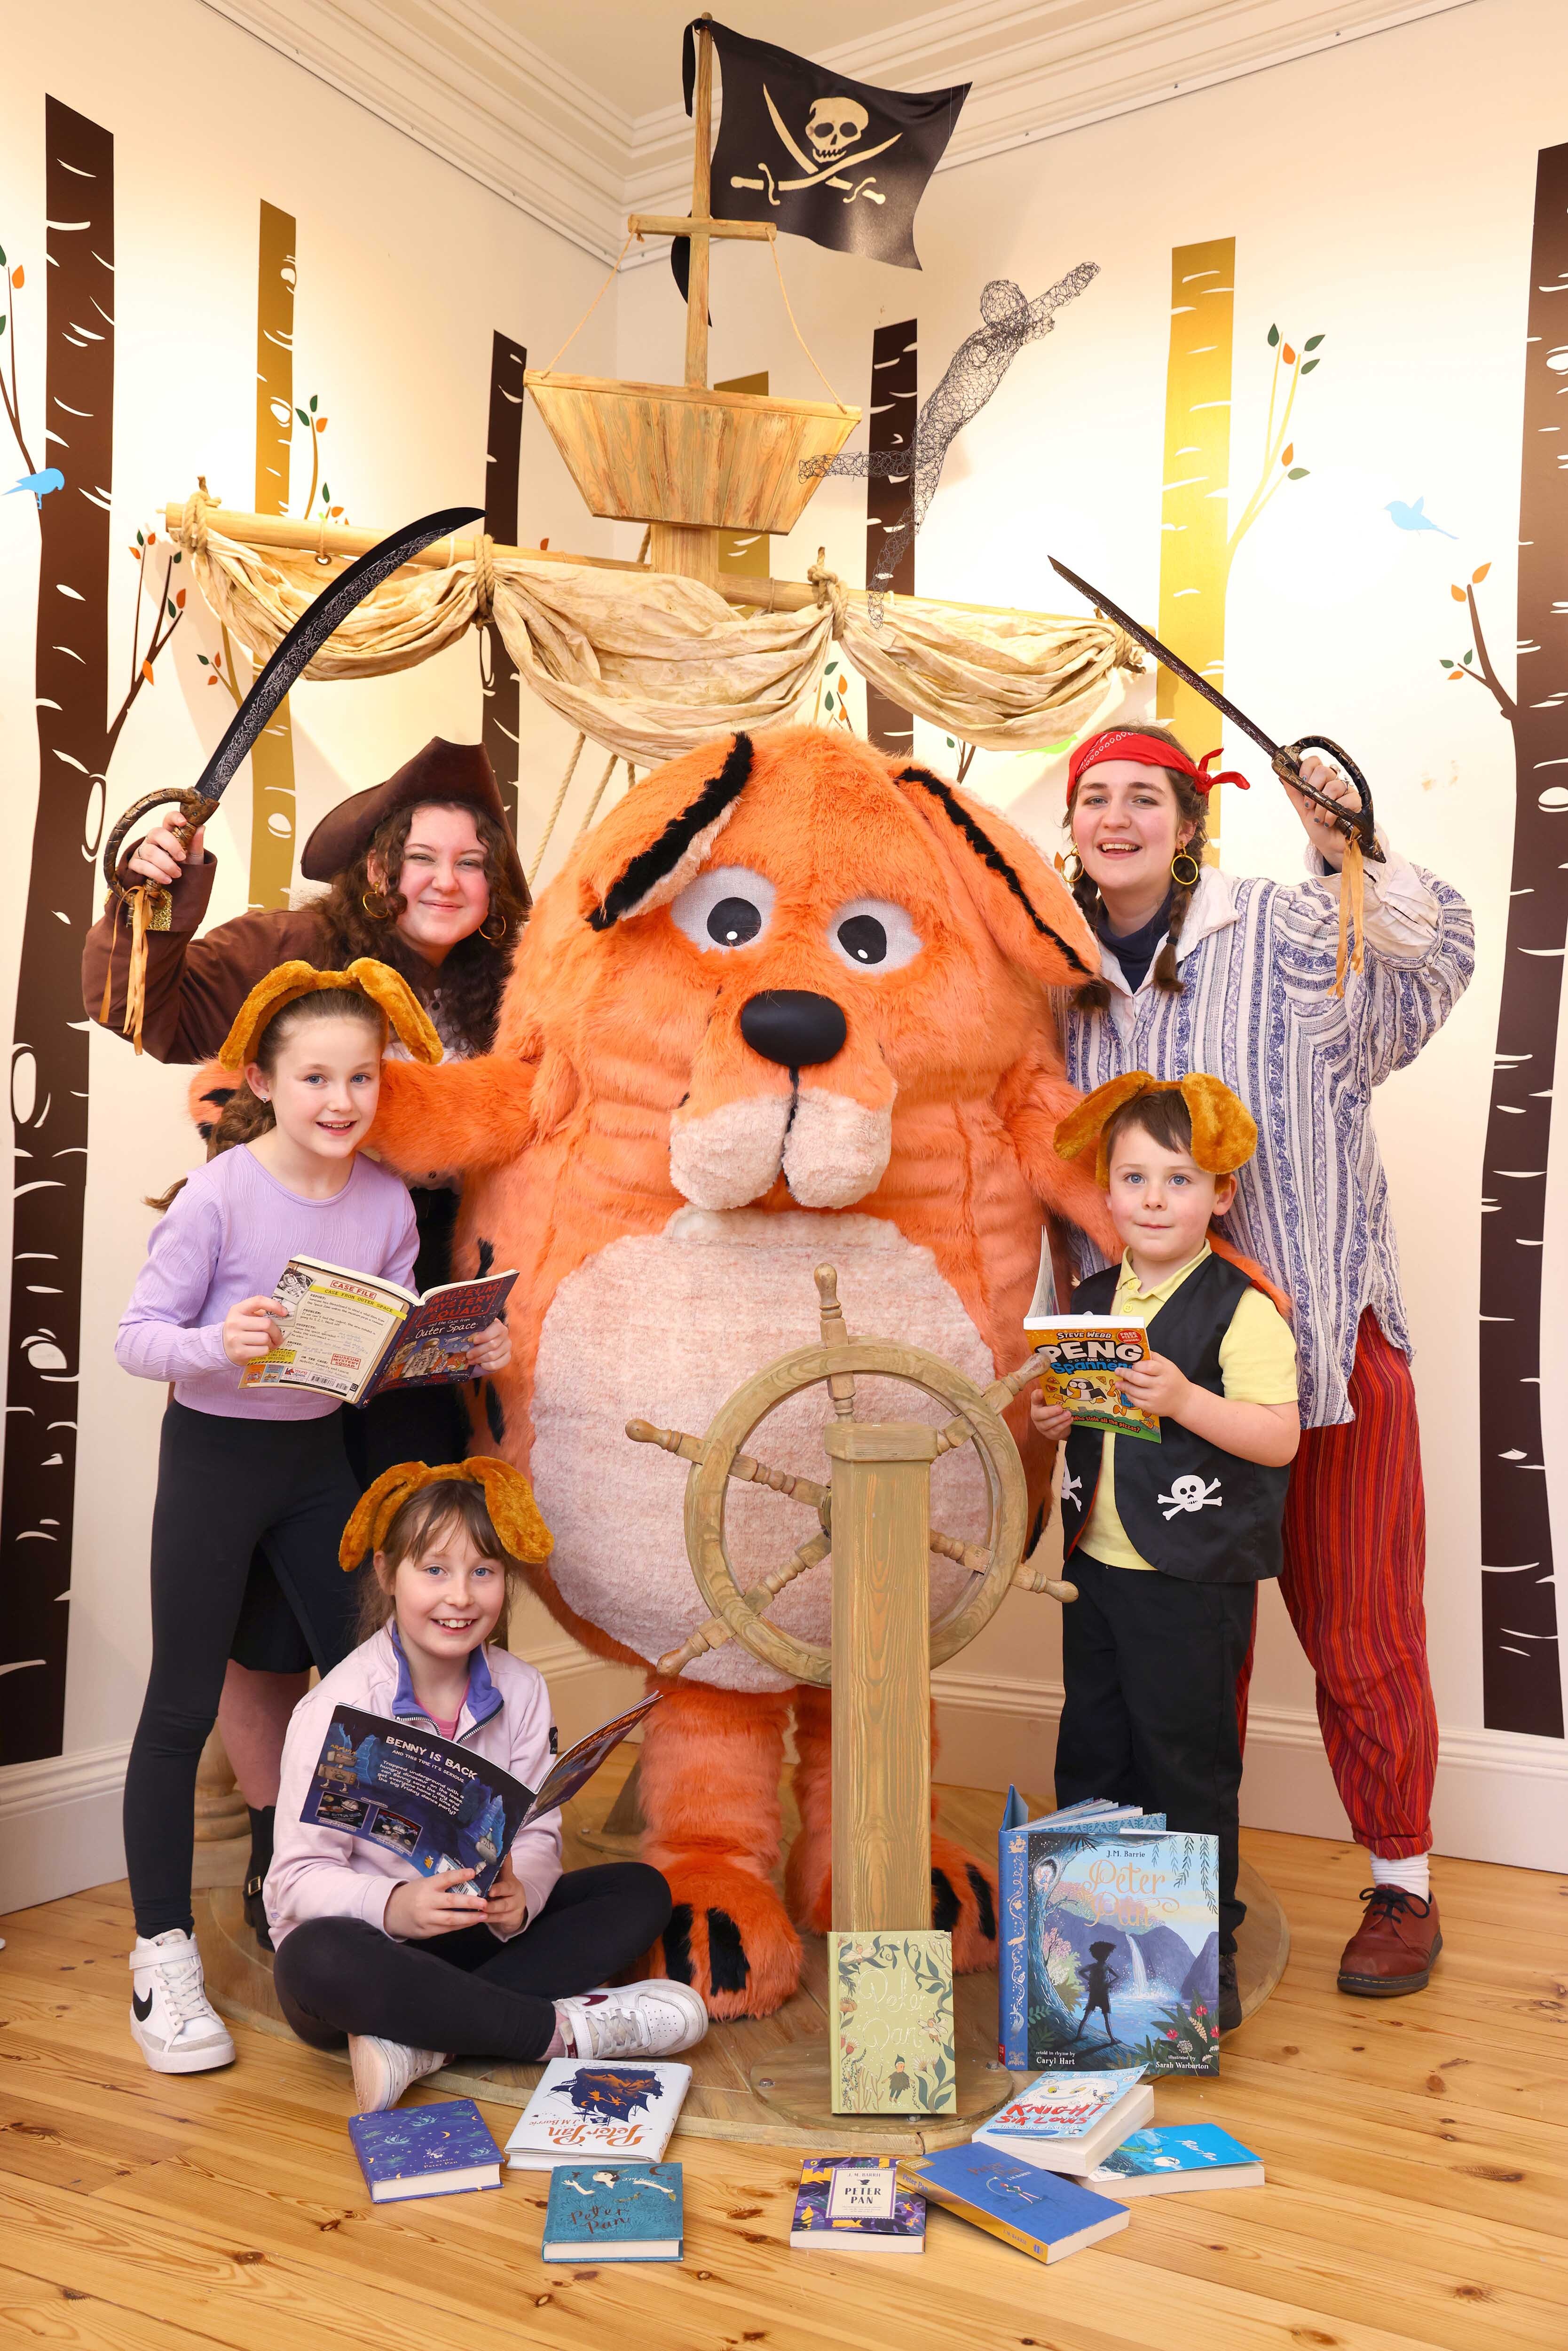 The Big DoG mascot is surrounded by children wearing matching orange dog ears and the Moat Brae Storyweavers dressed as pirates. The are gathering around a pirate ship play display with festival titles.